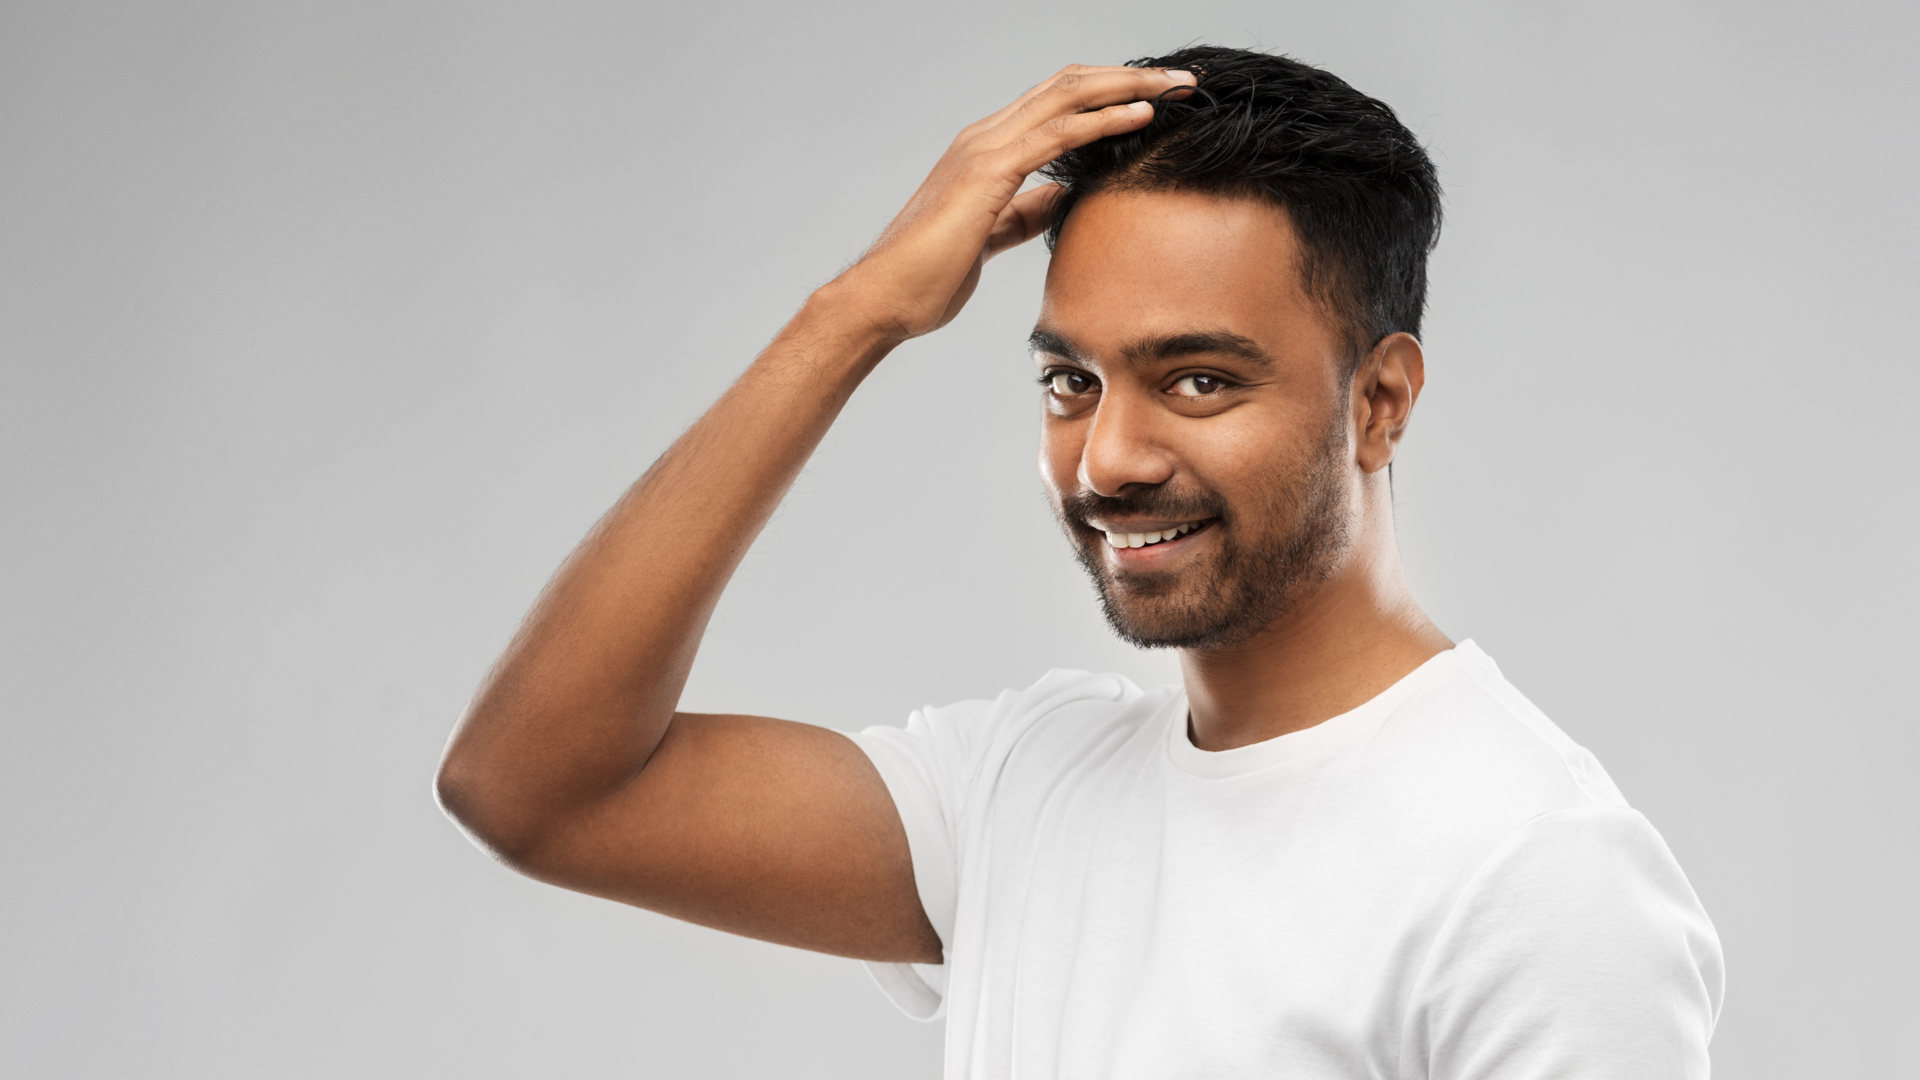 An image of a man flaunting his dandruff free hair.